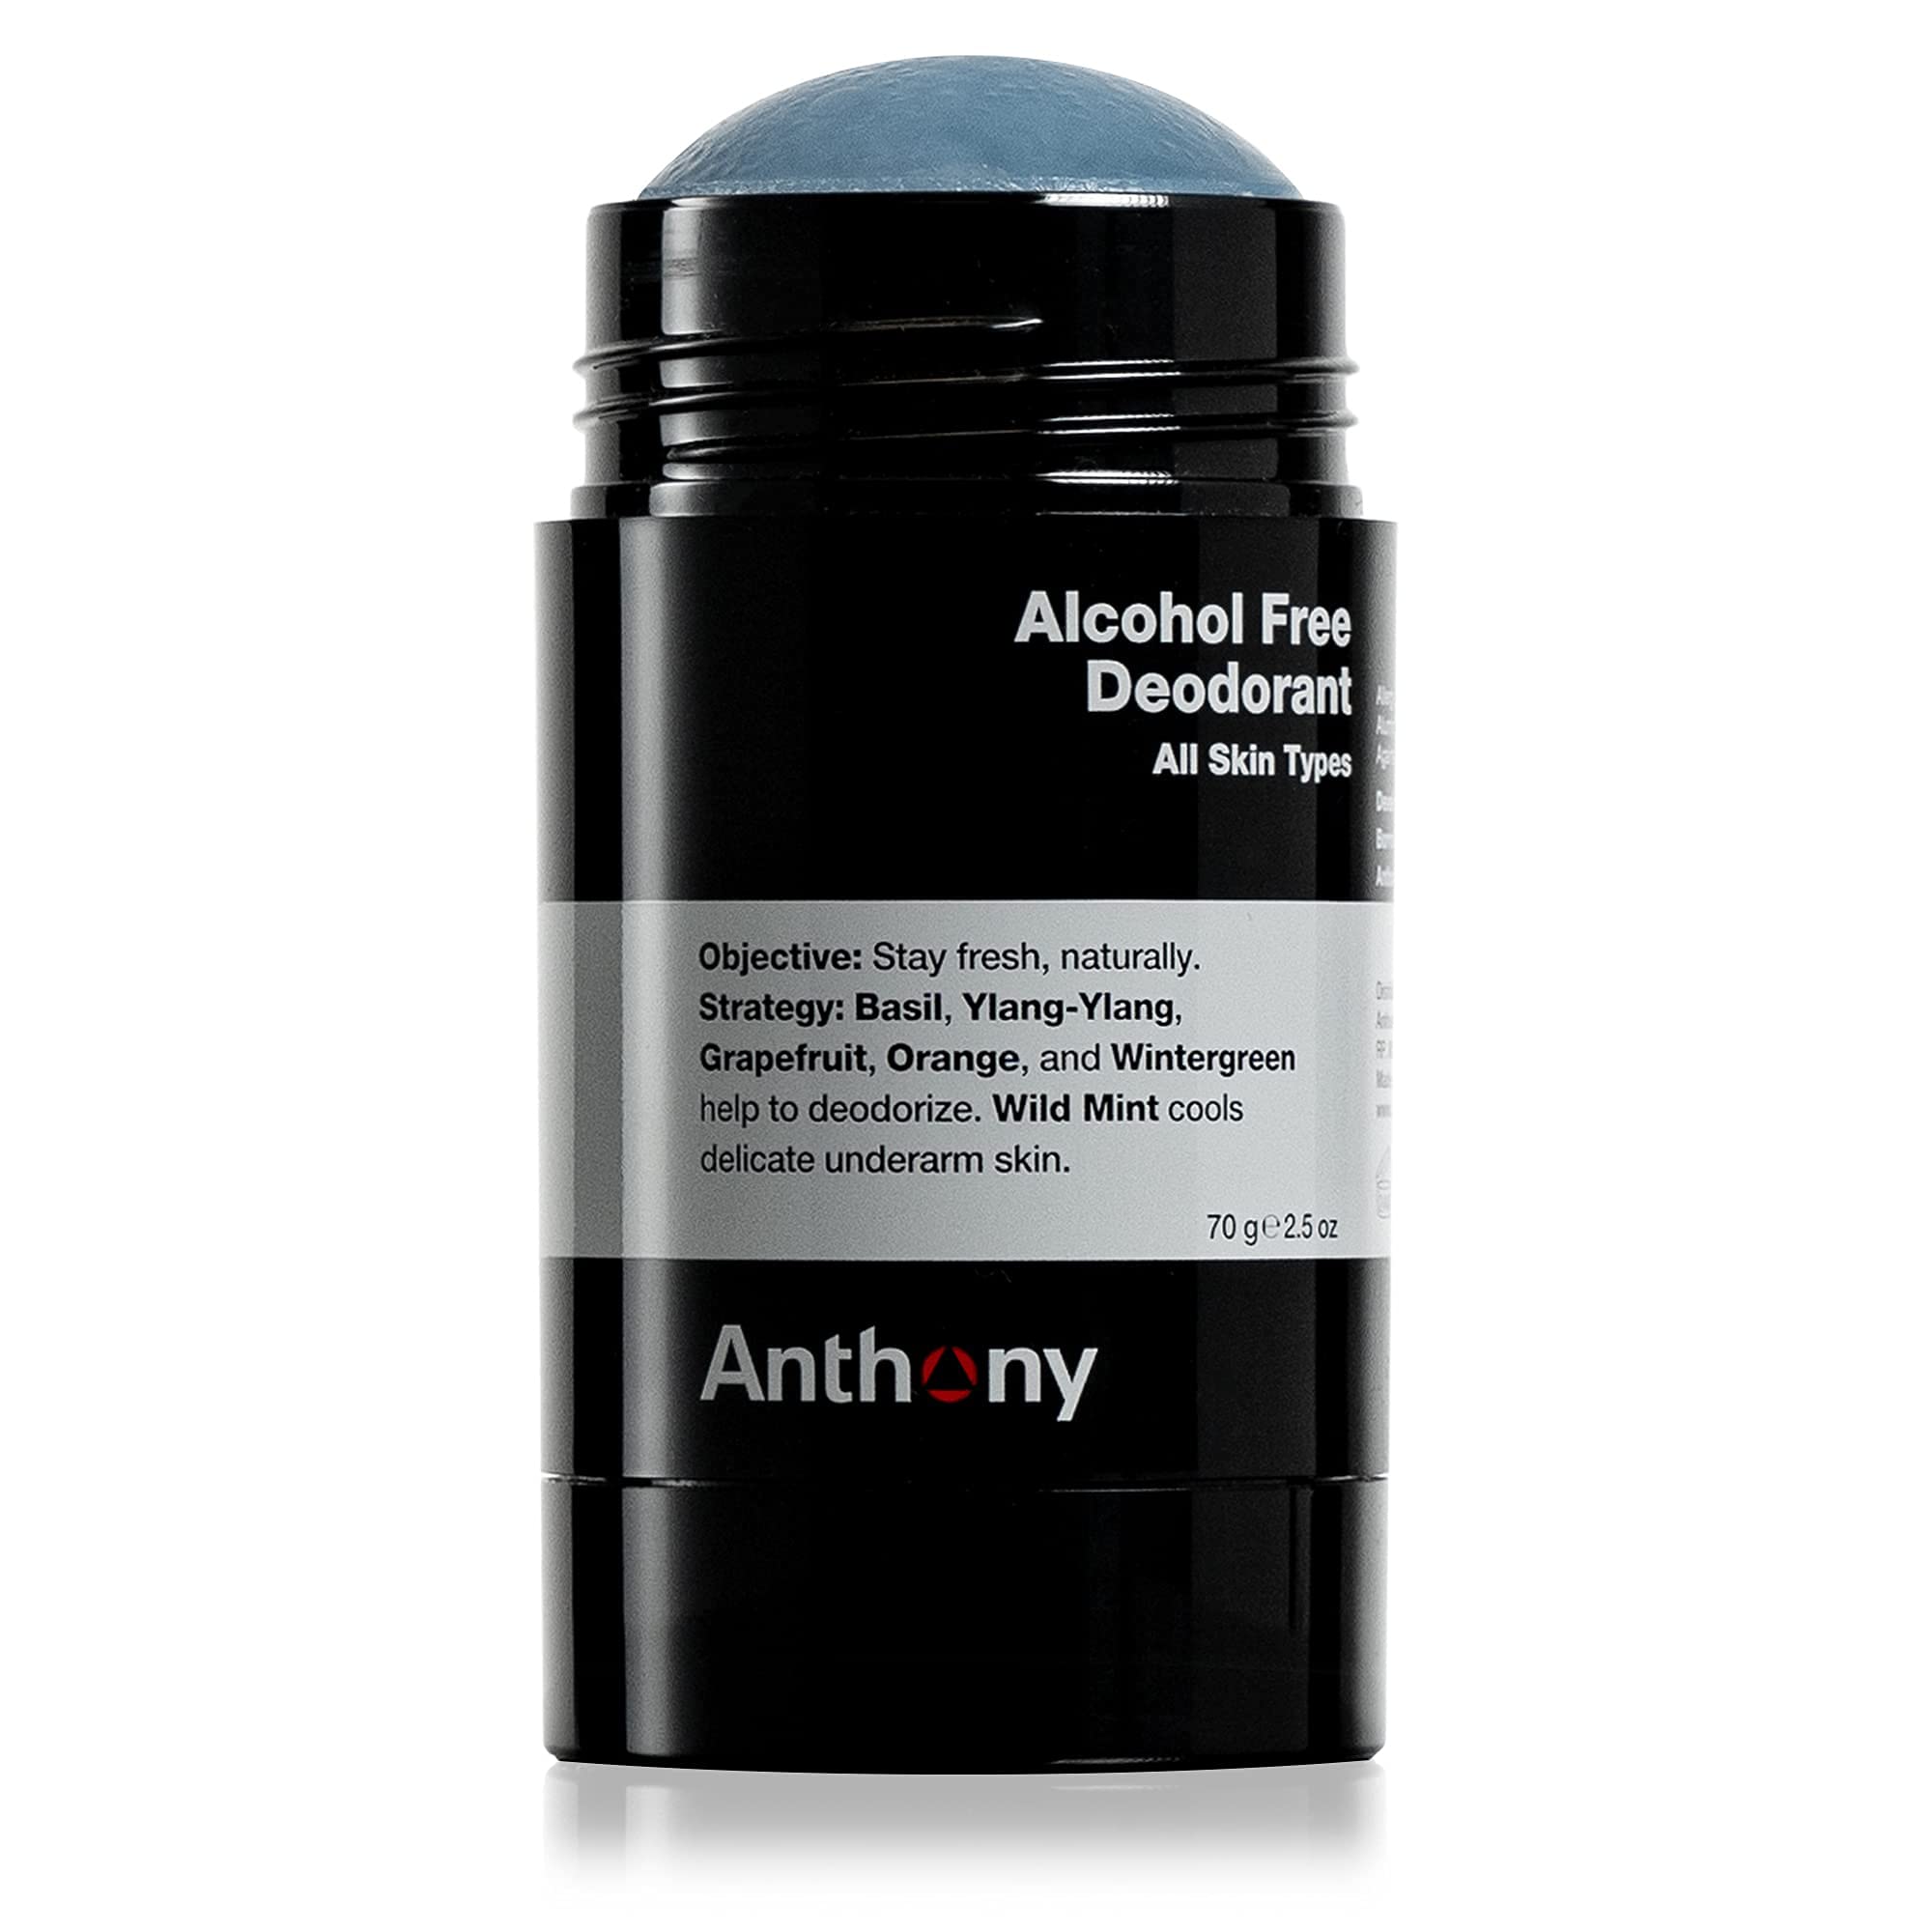 Anthony Alcohol Free, Aluminum Free Deodorant for Men – Non-Irritant Cool Gel Stick for Sensitive Skin – Sport Strength Stick Prevents Odor All Day – Clear, Stain Free – 2.5 Fl Oz